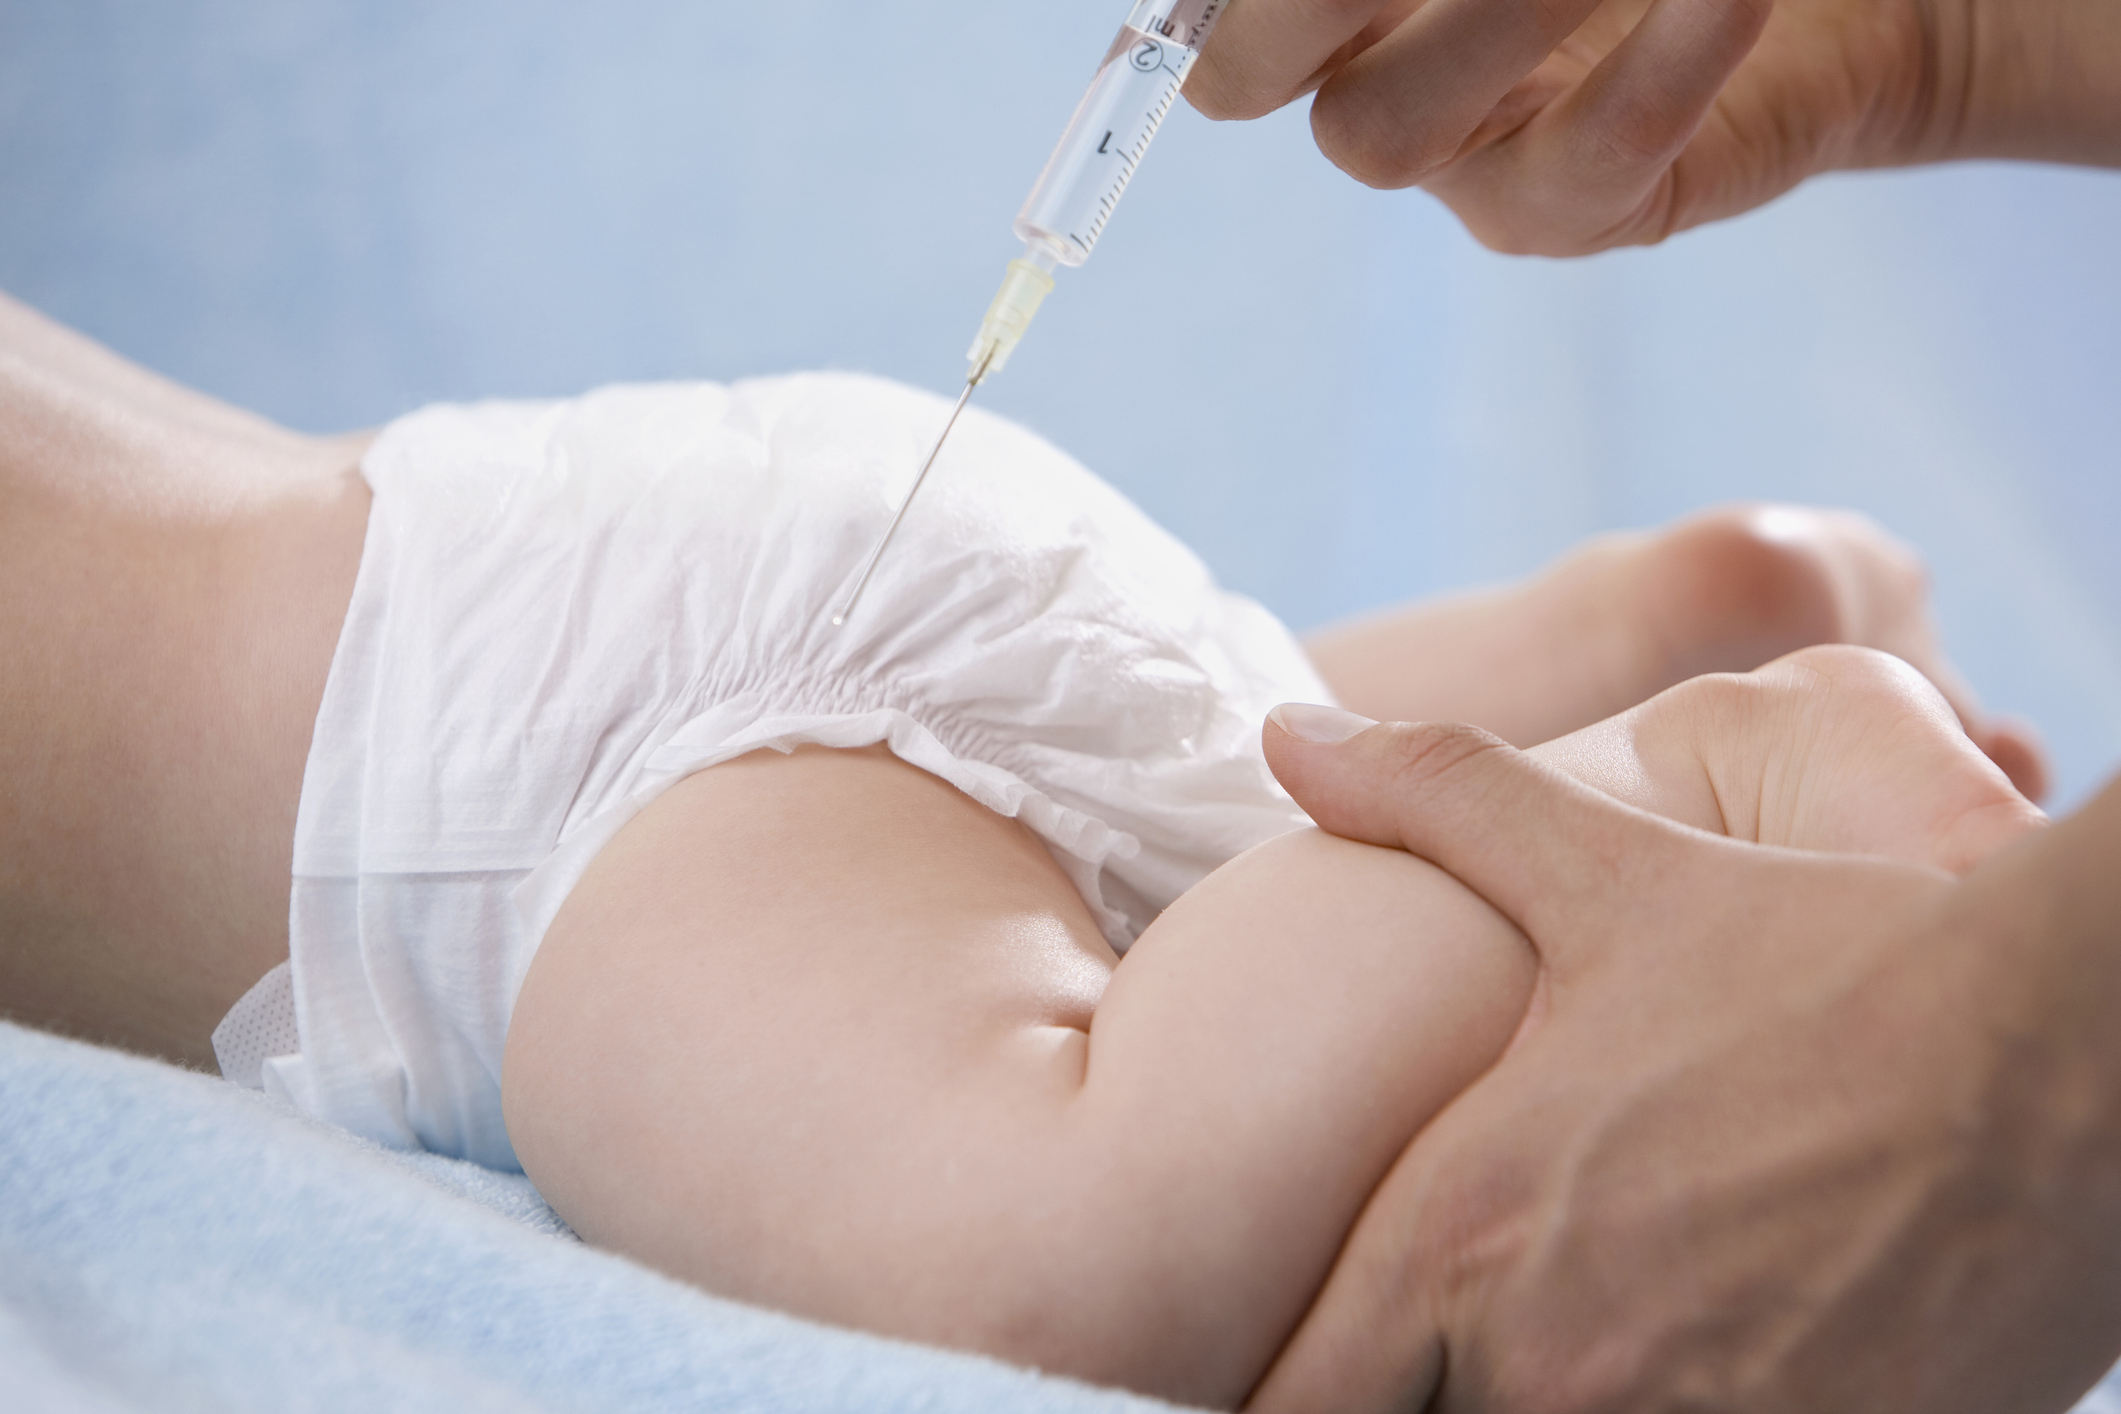 Female doctor injecting baby, close-up